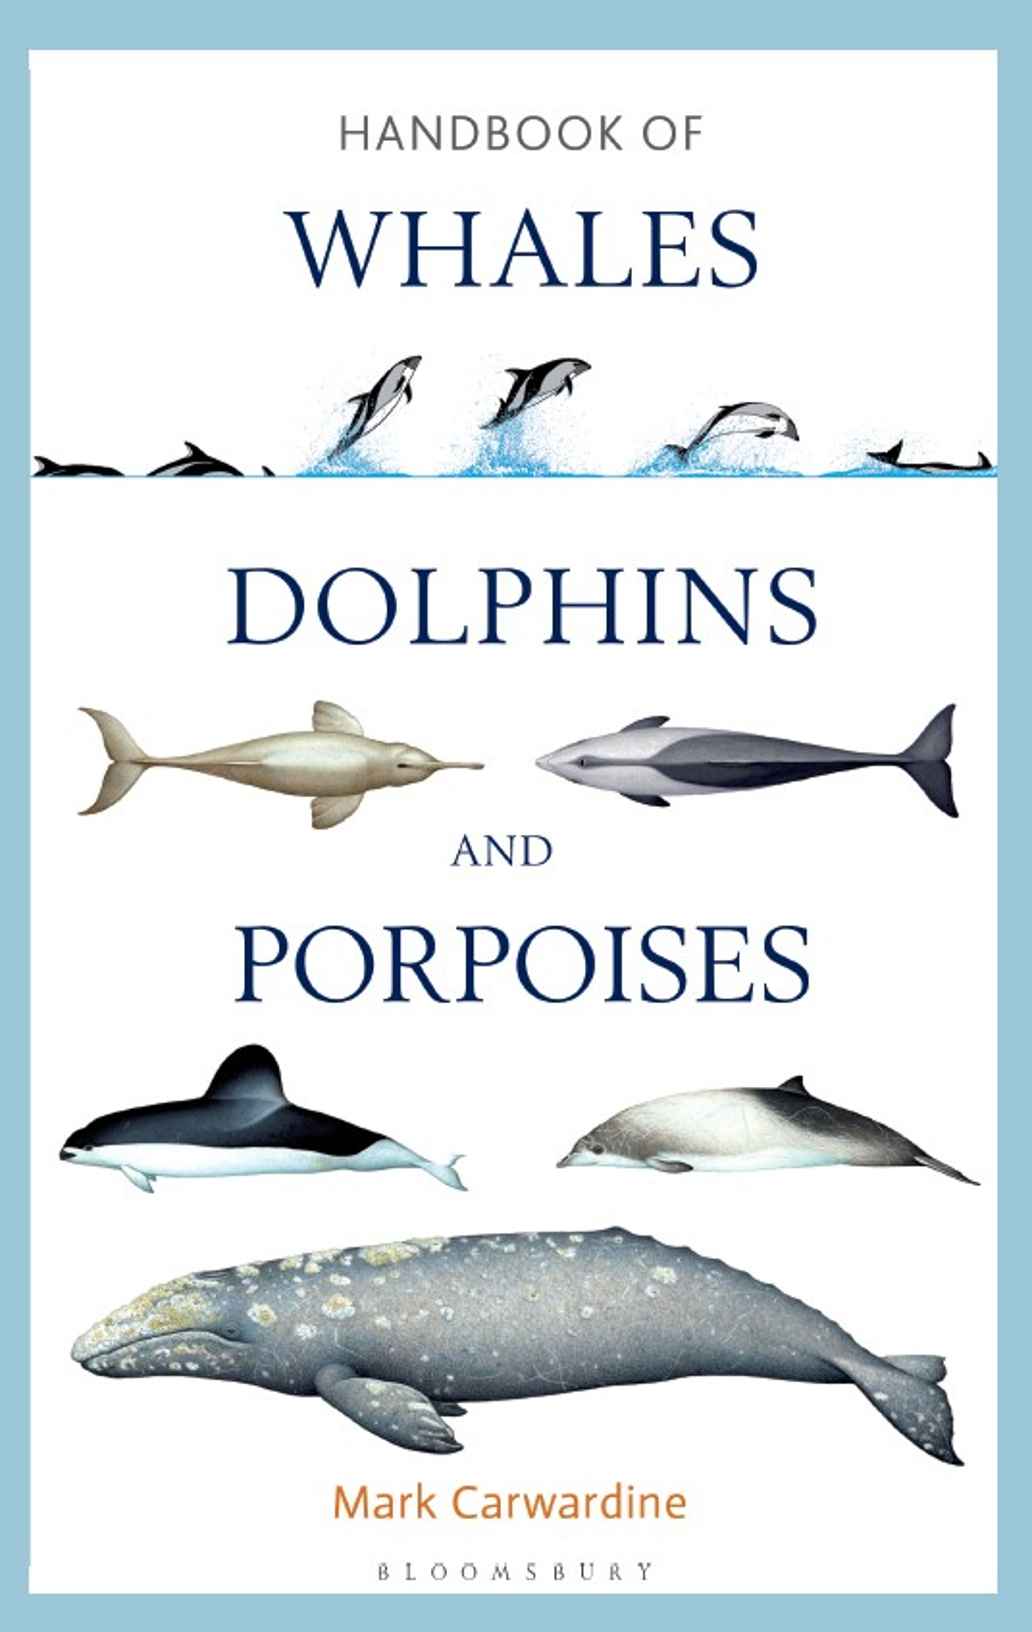 Handbook of Whales, Dolphins and Porpoises by Mark Carwardine